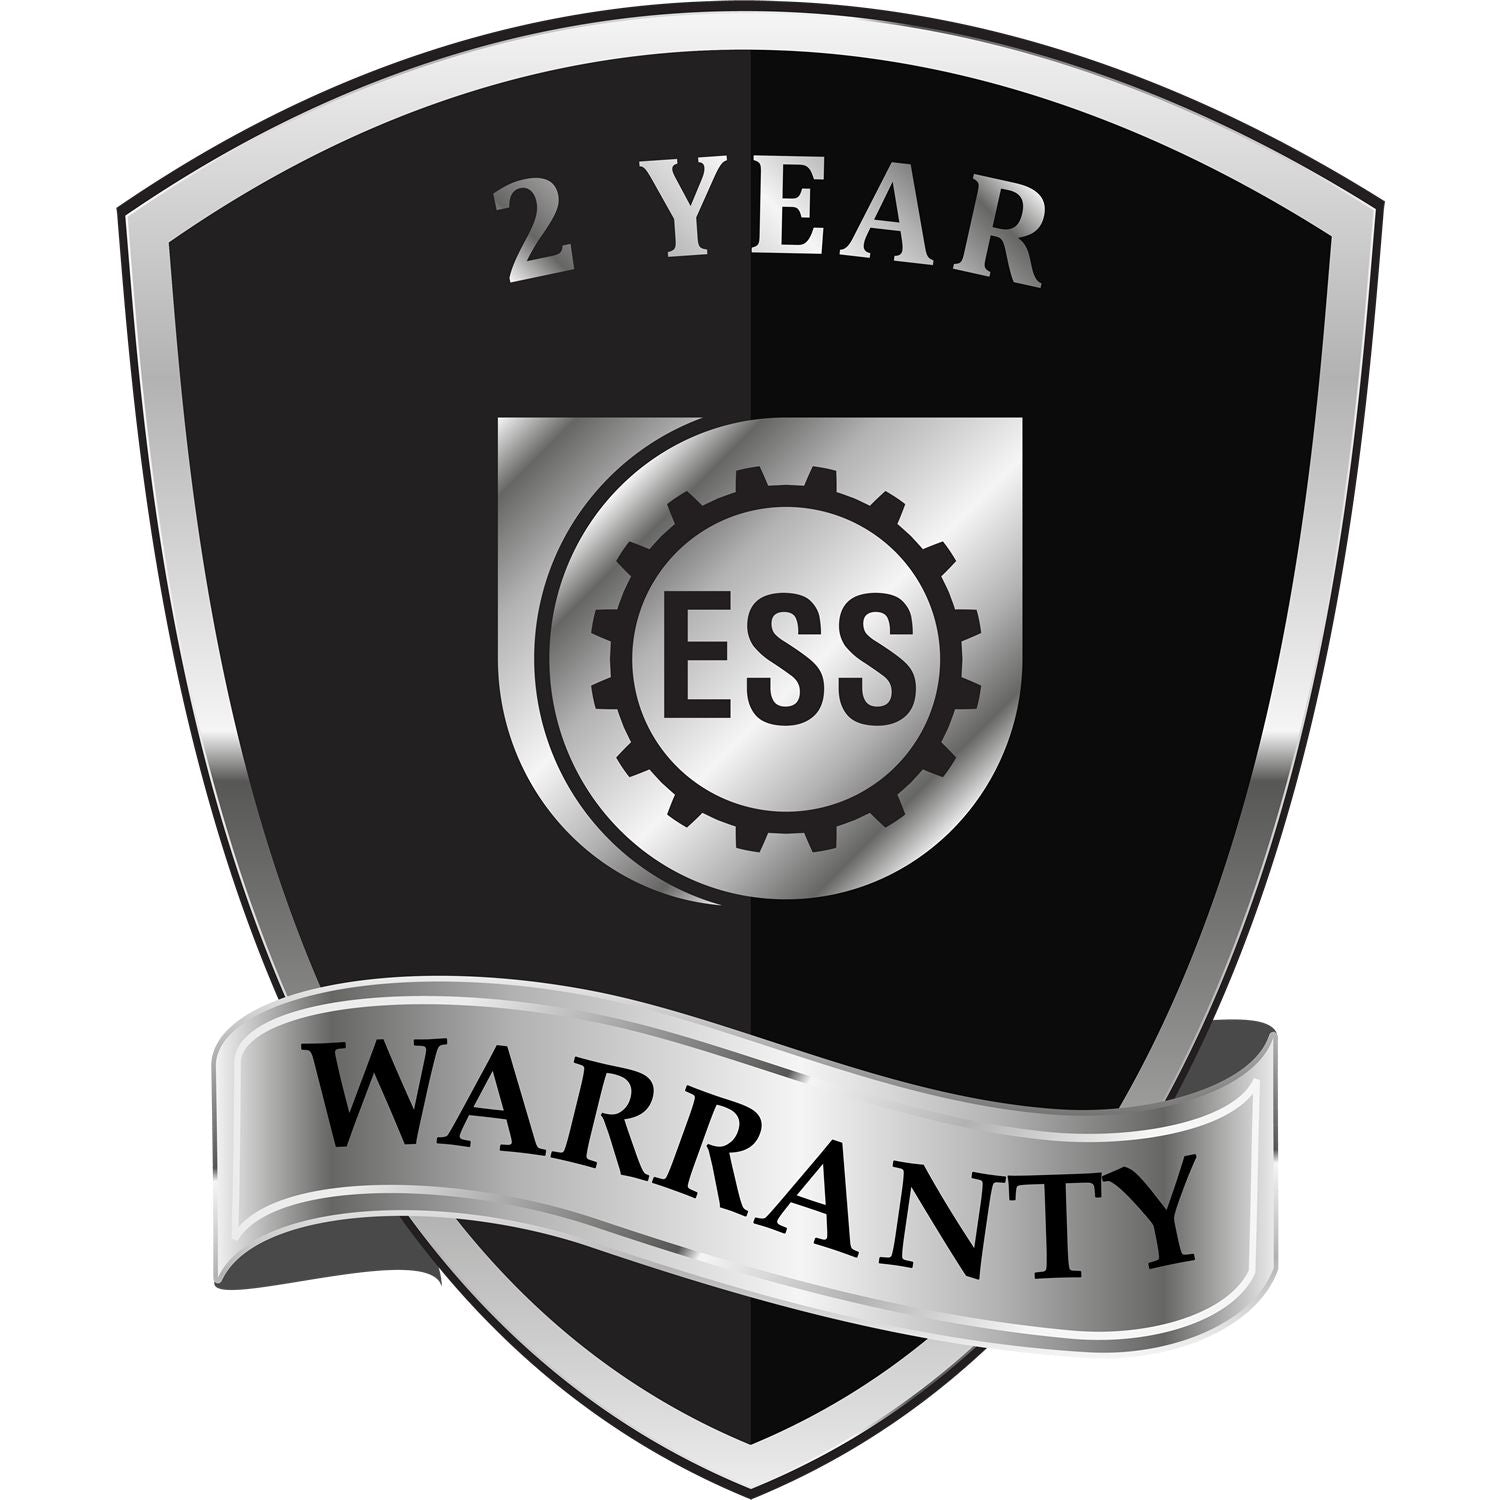 A black and silver badge or emblem showing warranty information for the State of South Carolina Extended Long Reach Geologist Seal